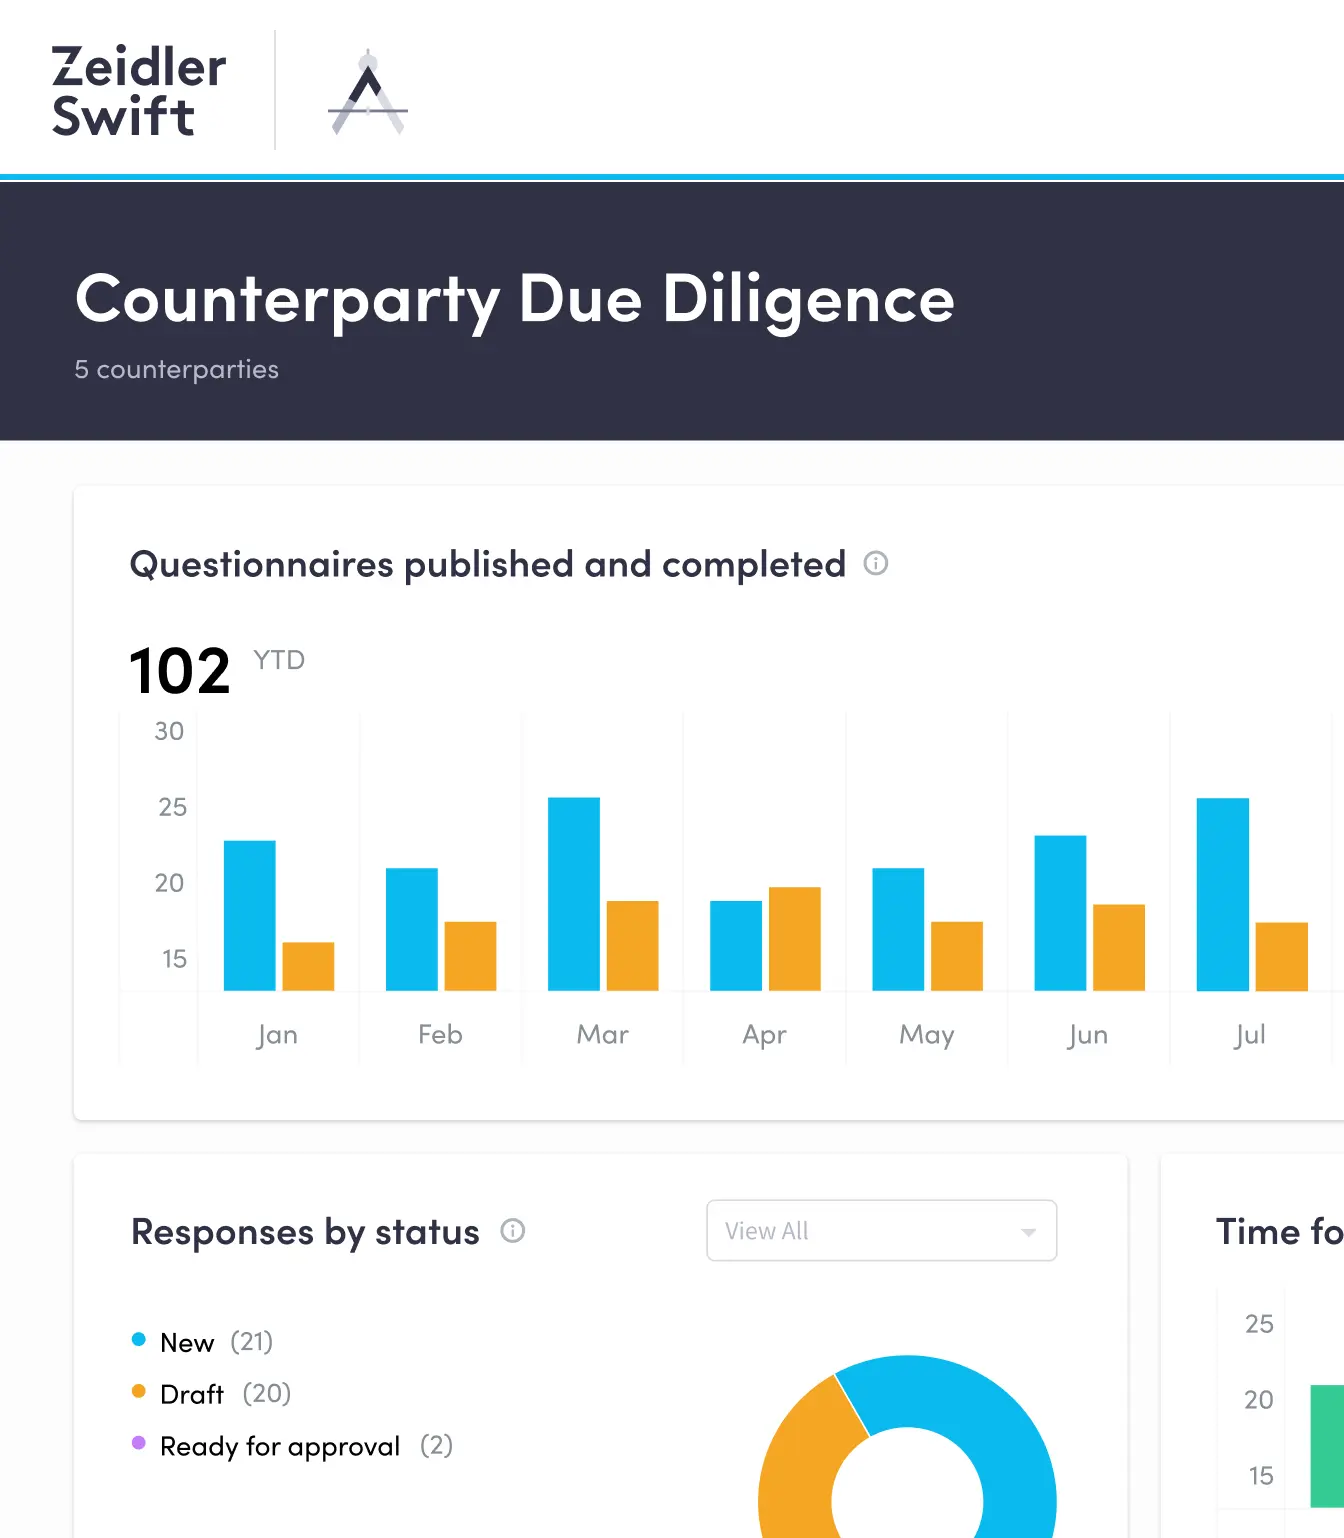 Counterparty due diligence stats from Zeidler Swift